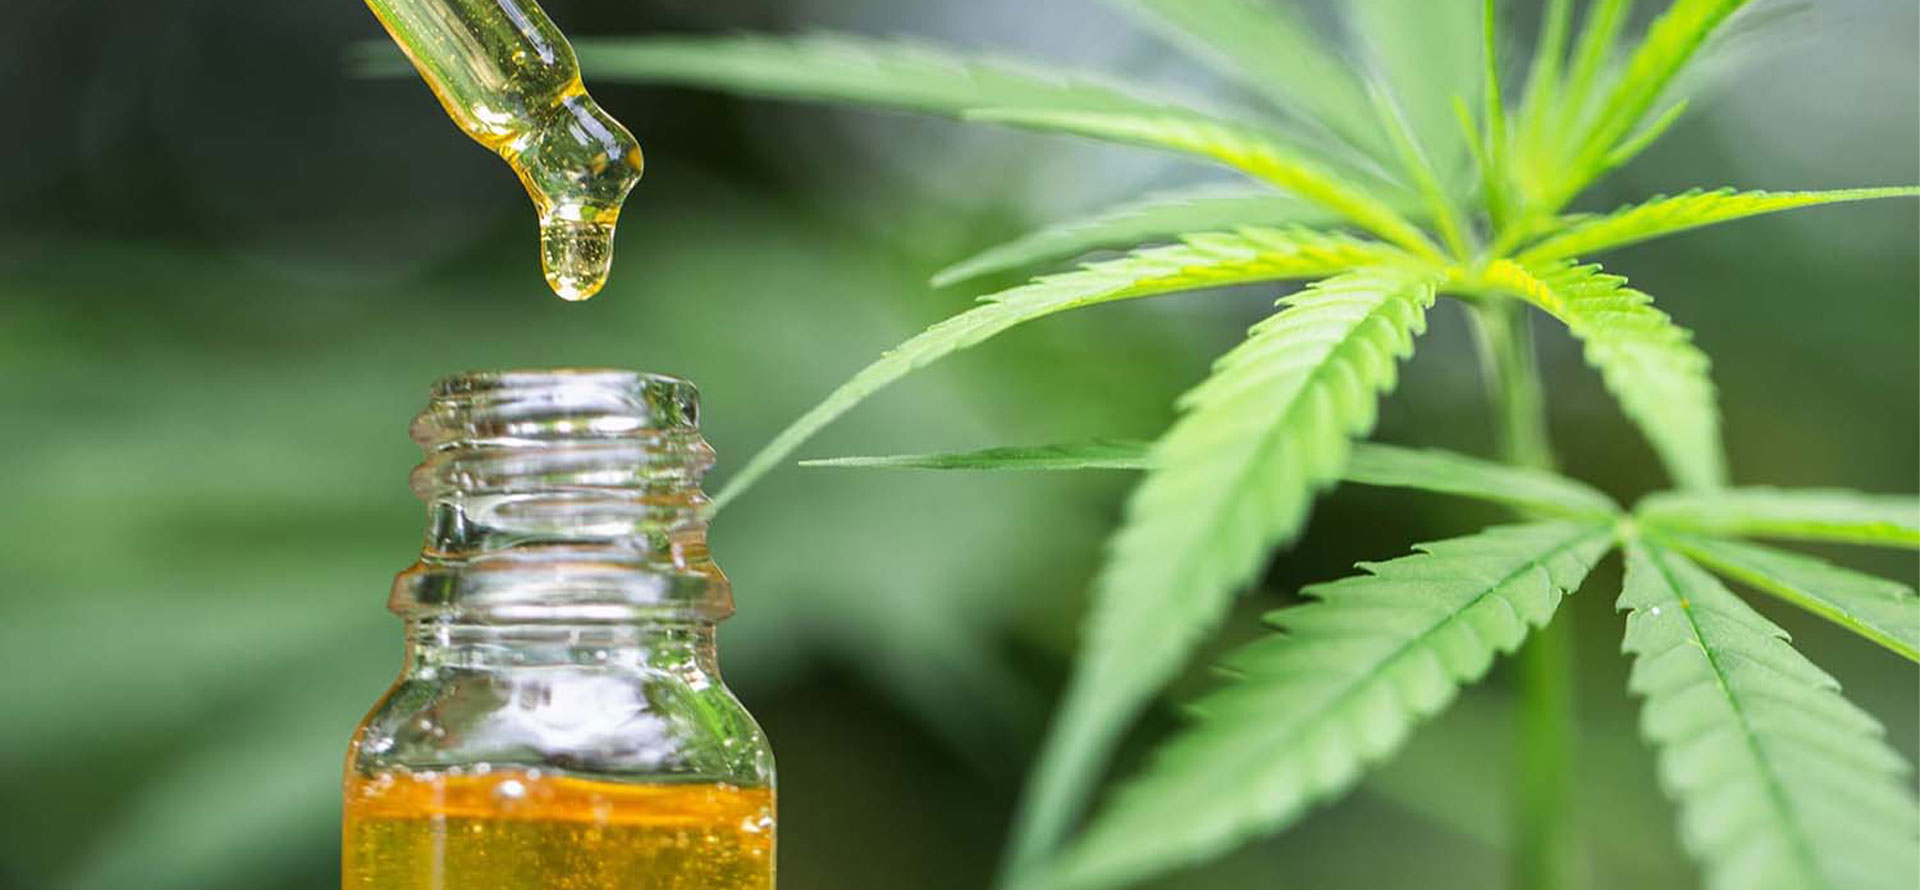 WHERE TO LEAR CBC OIL - Cbd|Oil|Benefits|Cbc|Effects|Pain|Study|Health|Thc|Products|Cannabinoids|Studies|Research|Anxiety|Cannabis|Symptoms|Evidence|People|System|Disease|Treatment|Inflammation|Hemp|Body|Receptors|Disorders|Brain|Plant|Cells|Side|Effect|Blood|Patients|Cancer|Product|Skin|Marijuana|Properties|Cannabidiol|Cannabinoid|Cbd Oil|Cbd Products|Cbc Oil|Side Effects|Endocannabinoid System|Chronic Pain|Multiple Sclerosis|Pain Relief|Cannabis Plant|Cbd Oil Benefits|Blood Pressure|Health Benefits|High Blood Pressure|Anti-Inflammatory Properties|Neuropathic Pain|Animal Studies|Hemp Plant|Hemp Oil|Anxiety Disorders|Cbd Product|Immune System|Clinical Trials|Cbd Gummies|Nerve Cells|Nervous System|Entourage Effect|Hemp Seed Oil|United States|Cbd Oils|Drug Administration